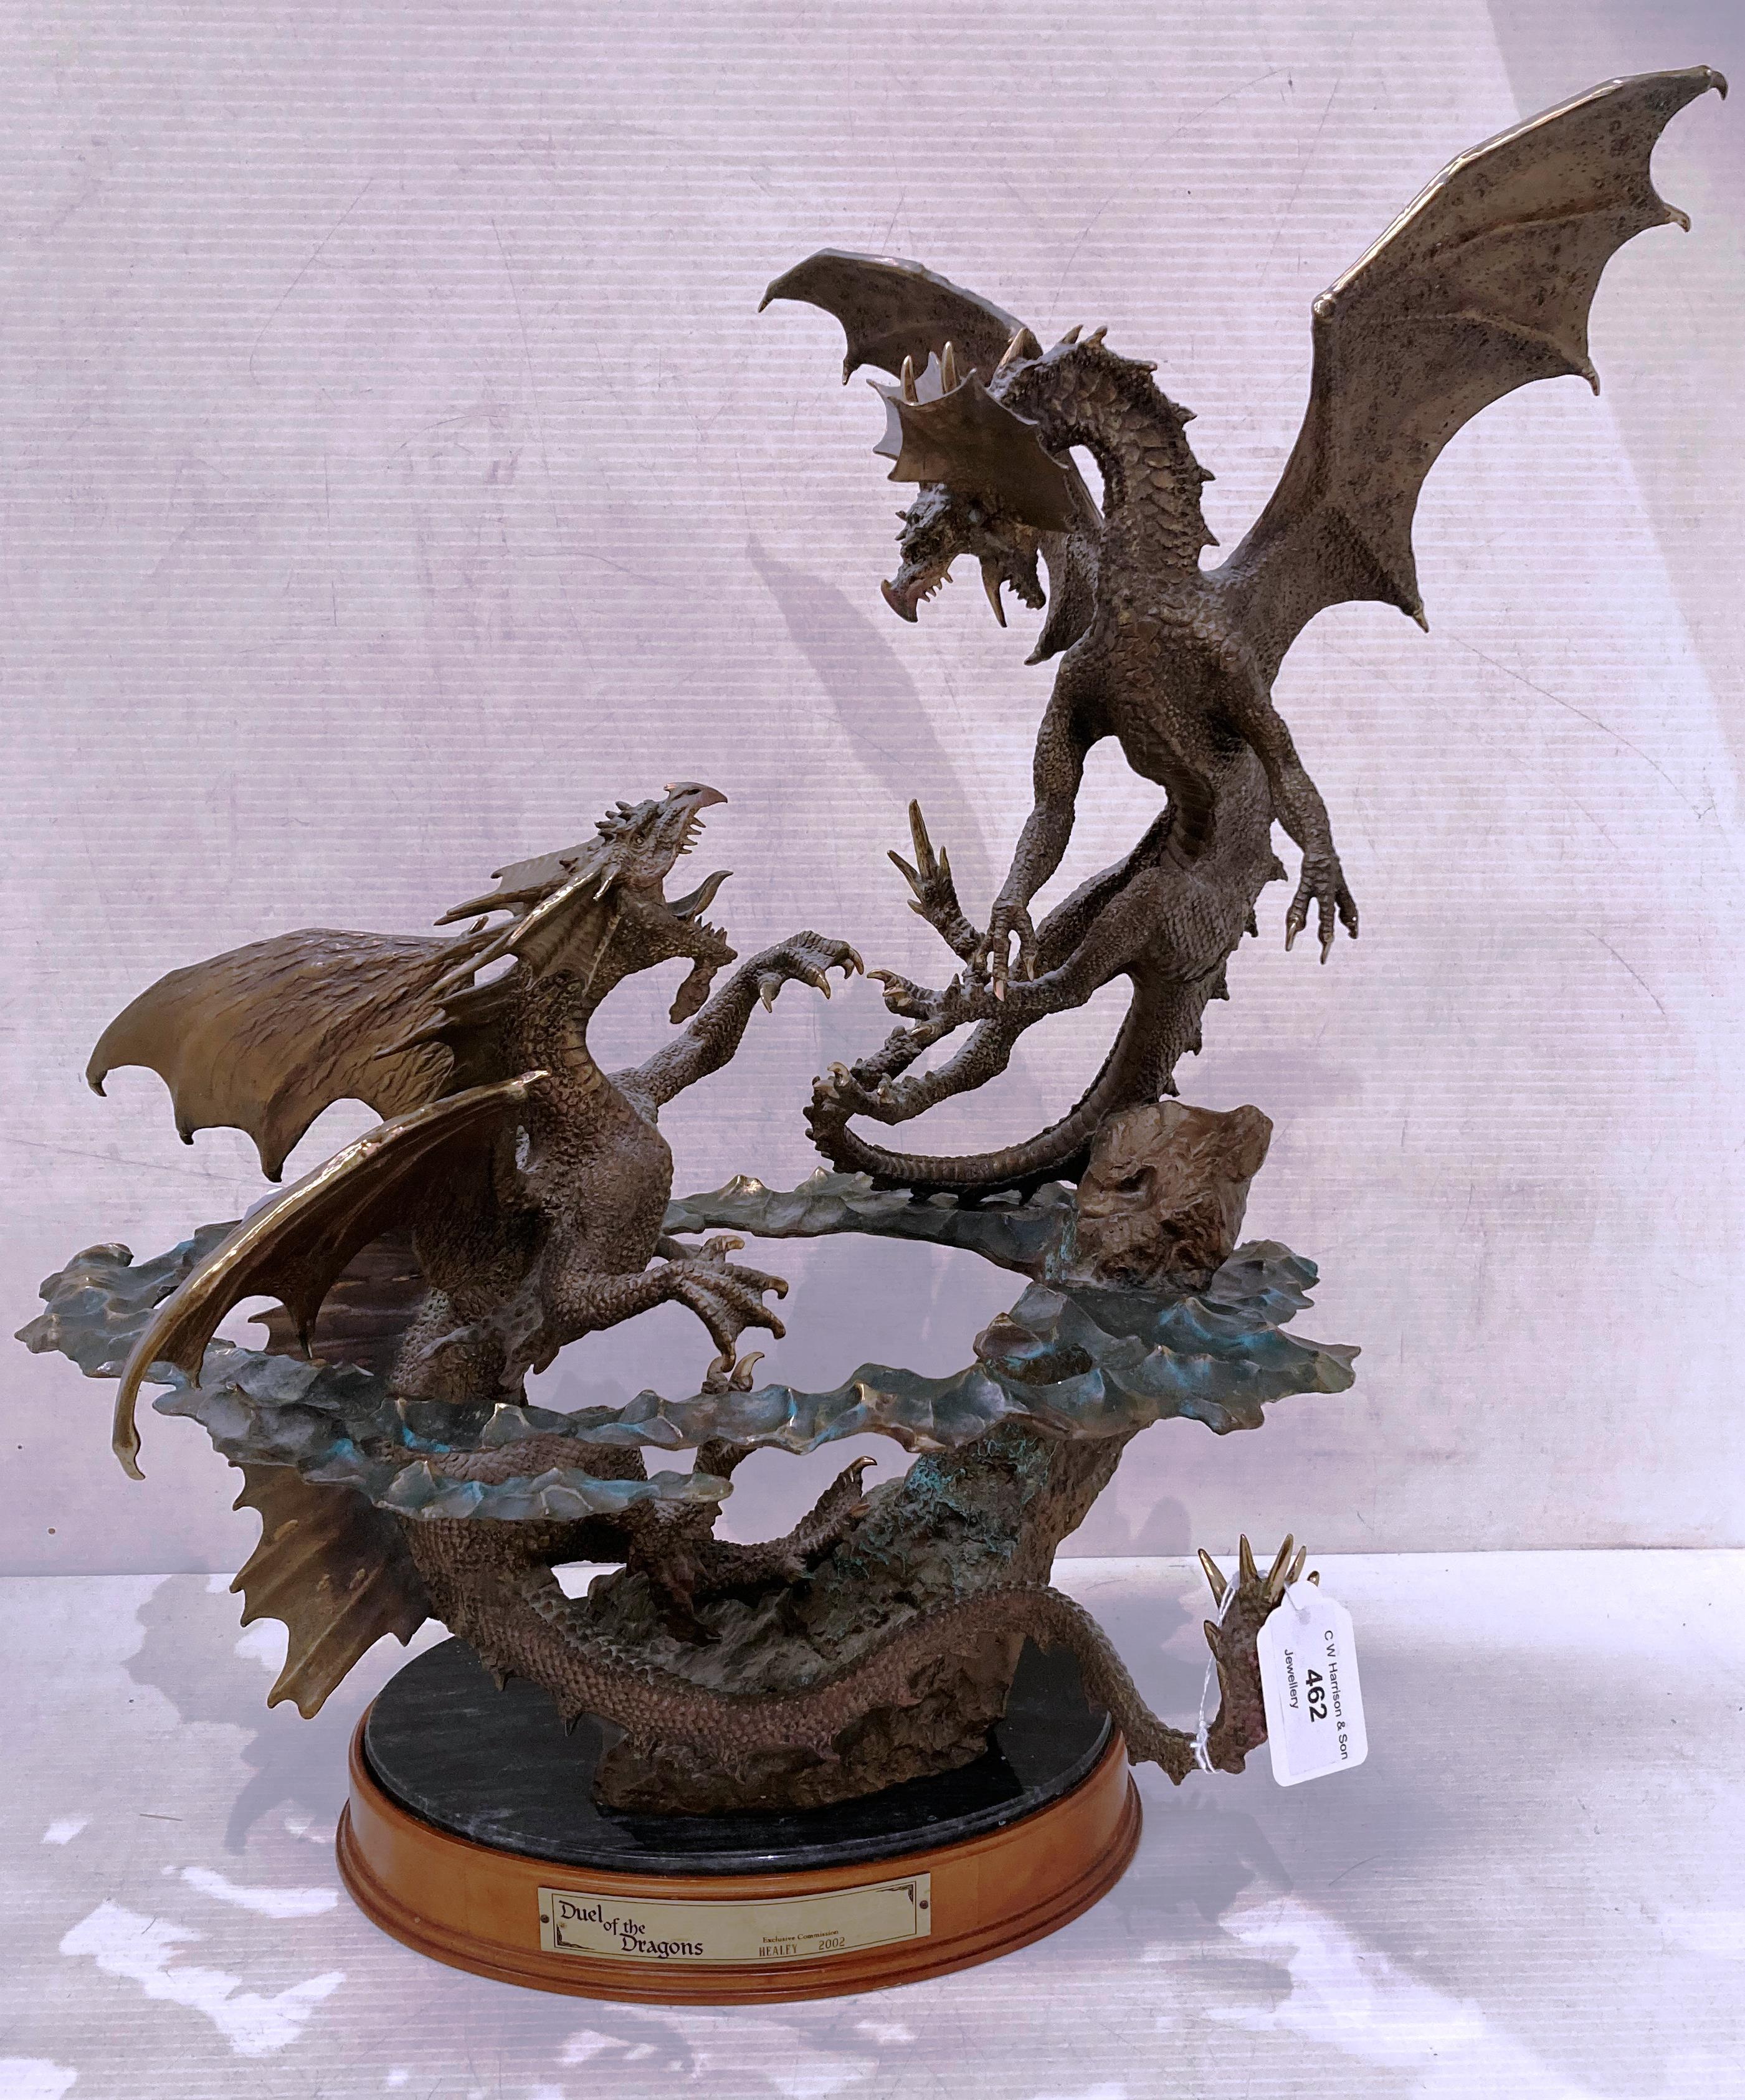 'Duel of the Dragons' exclusive commission Healey 2002 The Franklin Mint bronze statue,